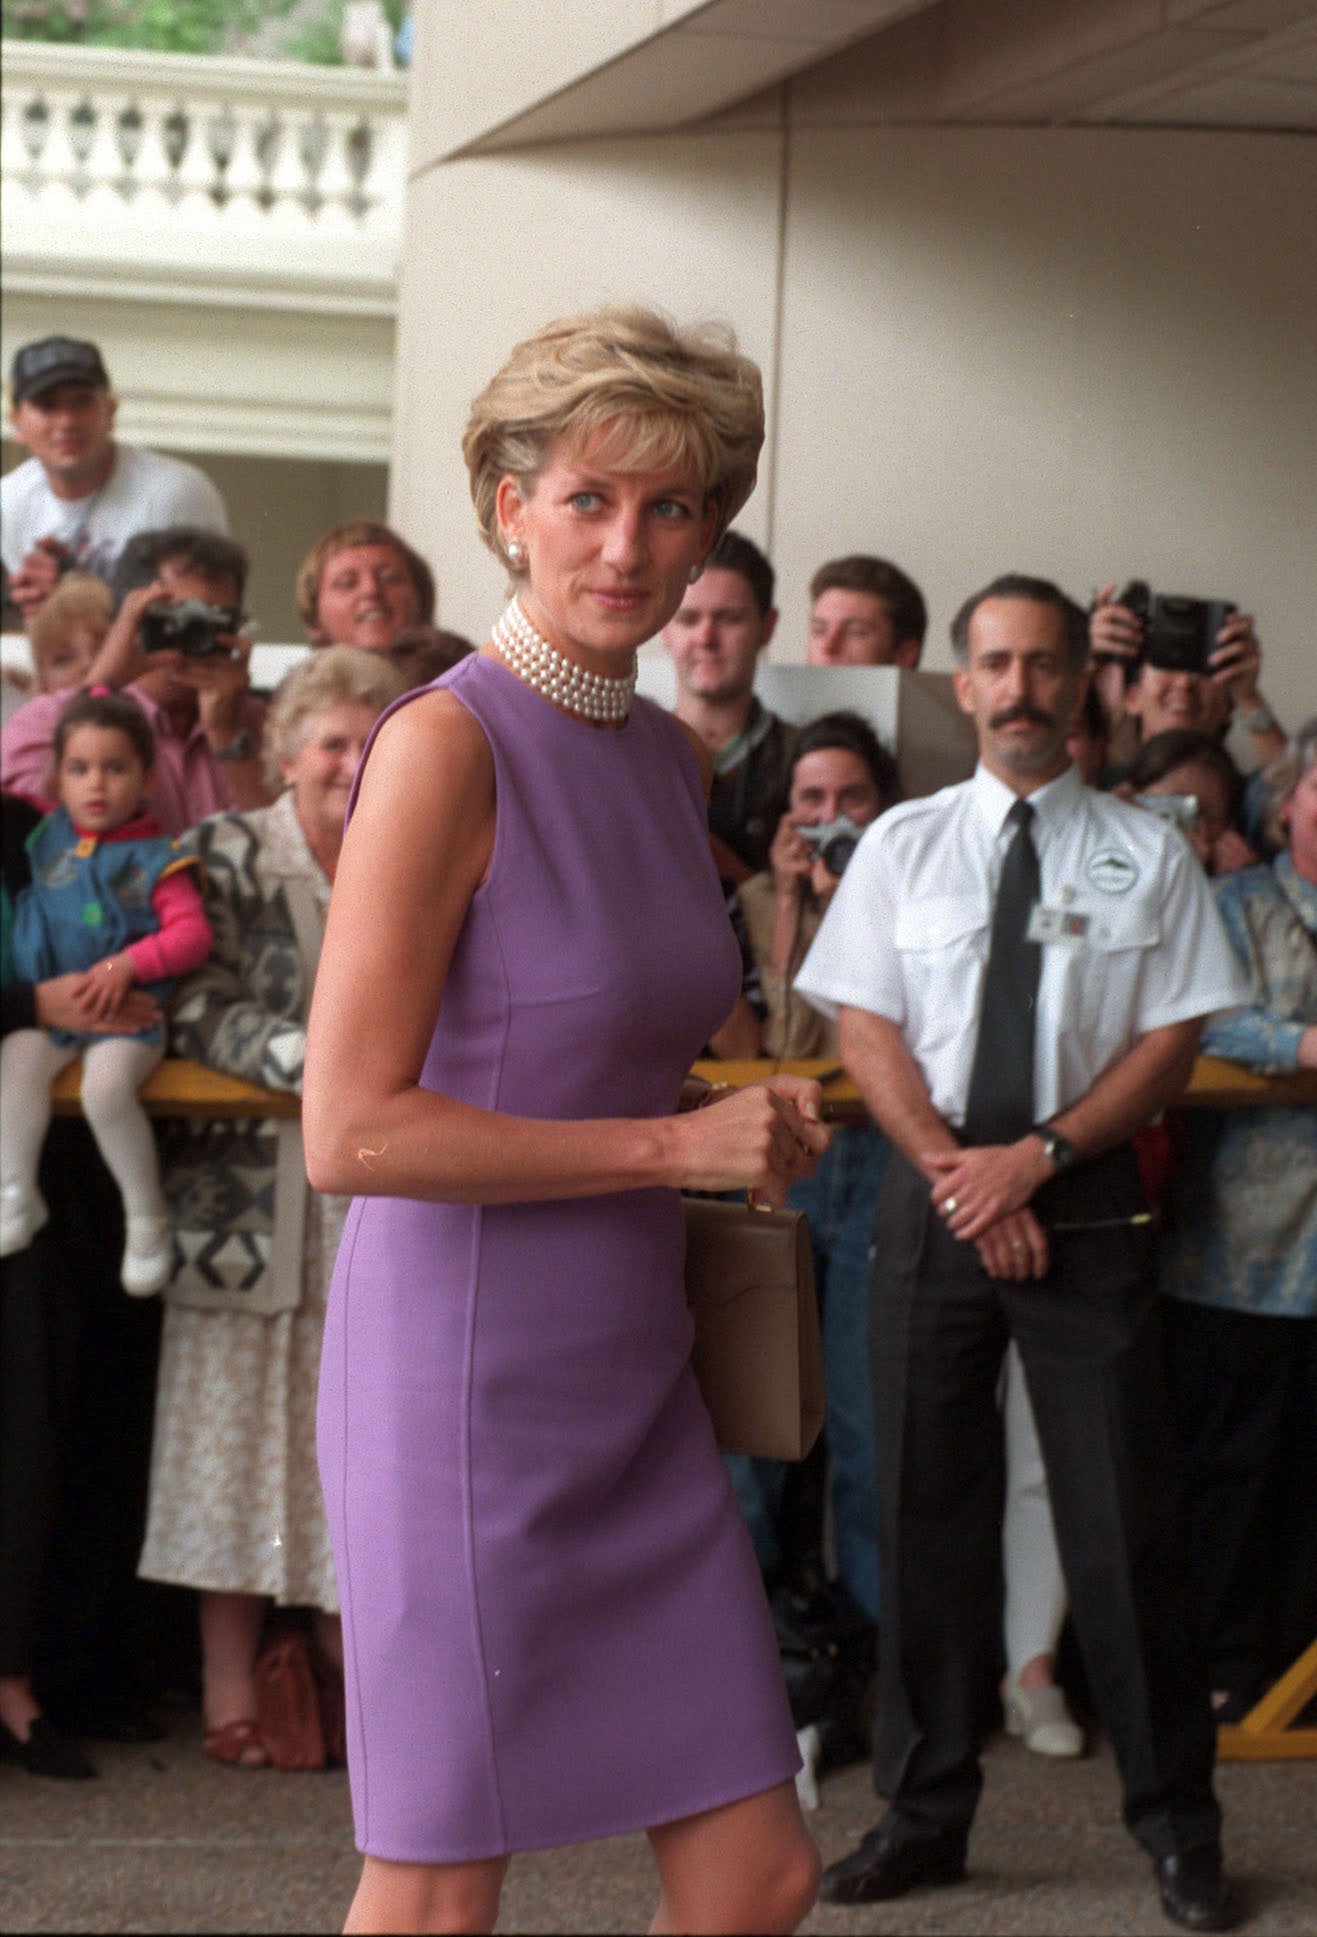 In one of her more reserved looks in 1996, Diana chose a lilac shift dress with a pearl choker, neither of which would look out of place today, either in the workplace or during an evening dinner out.